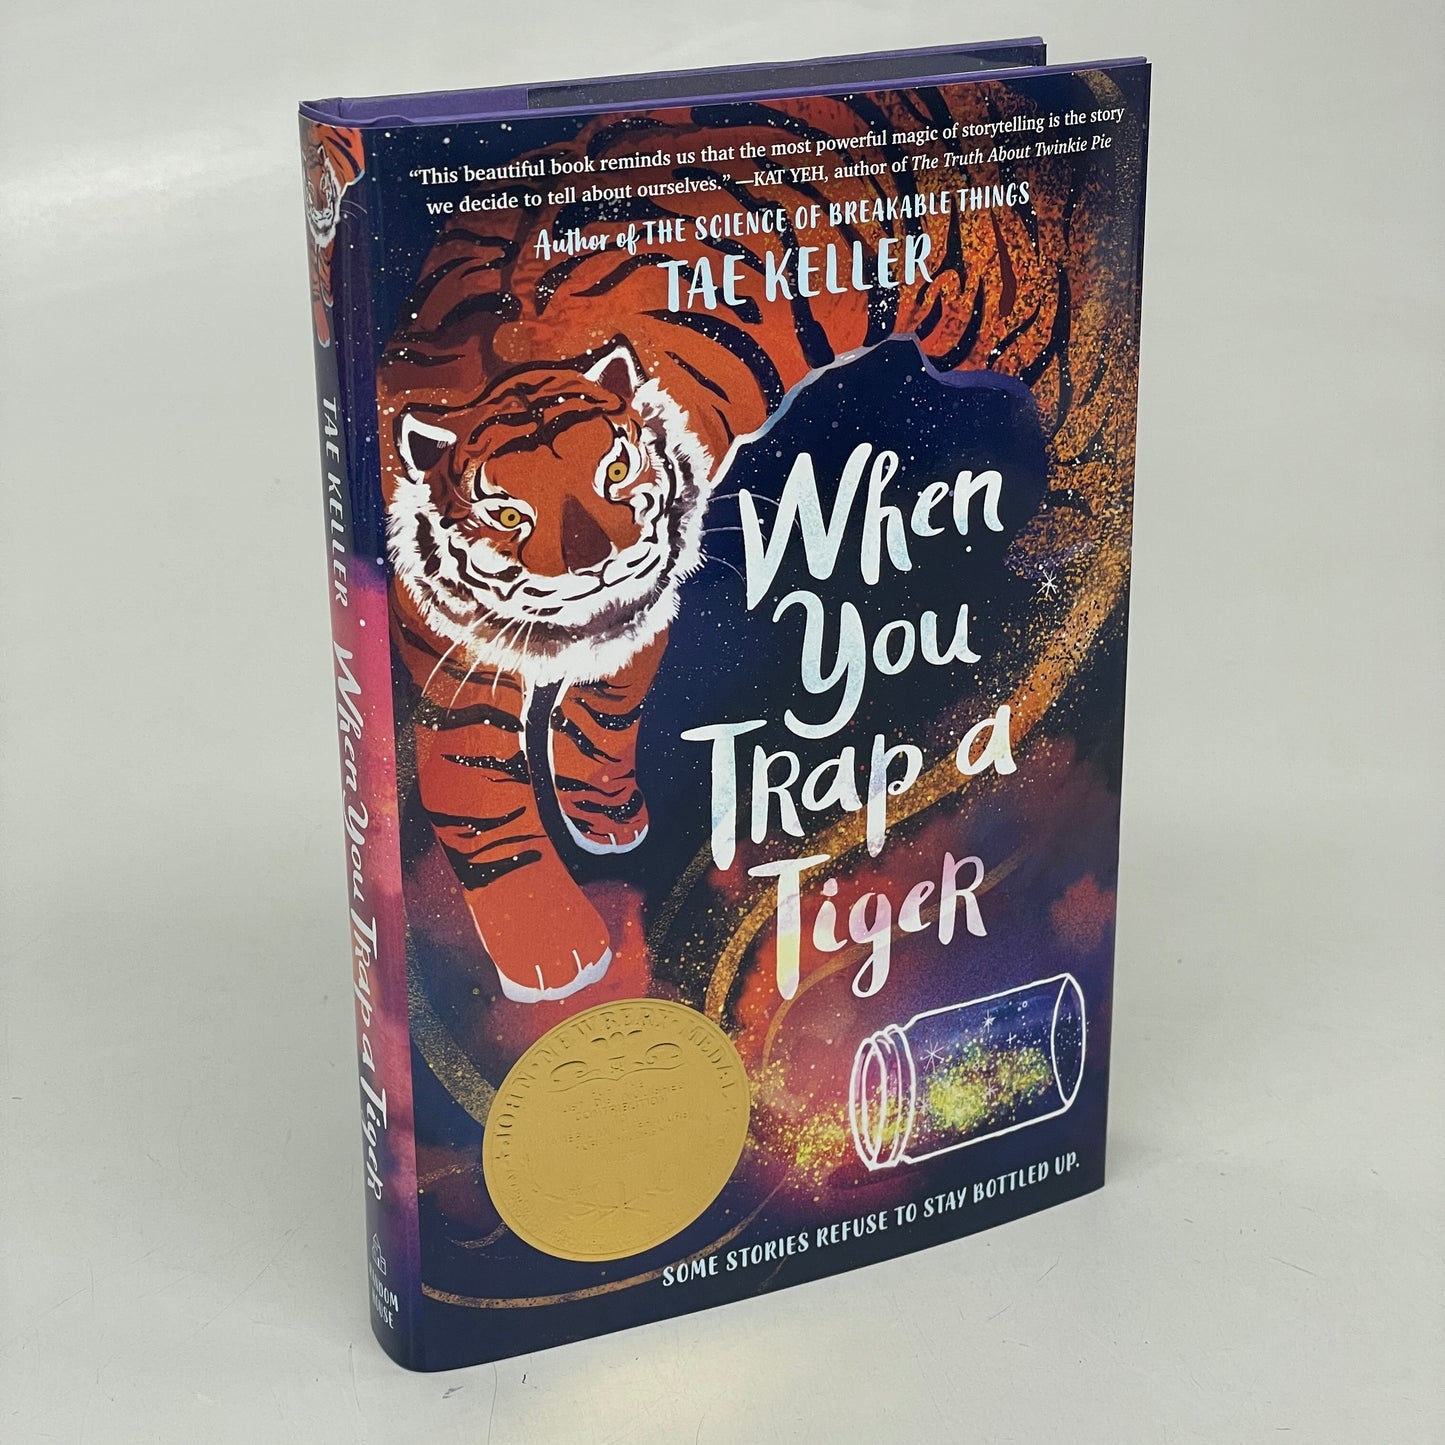 WHEN YOU TRAP A TIGER Hardcover Book By Newbery Medal Winner Tae Keller